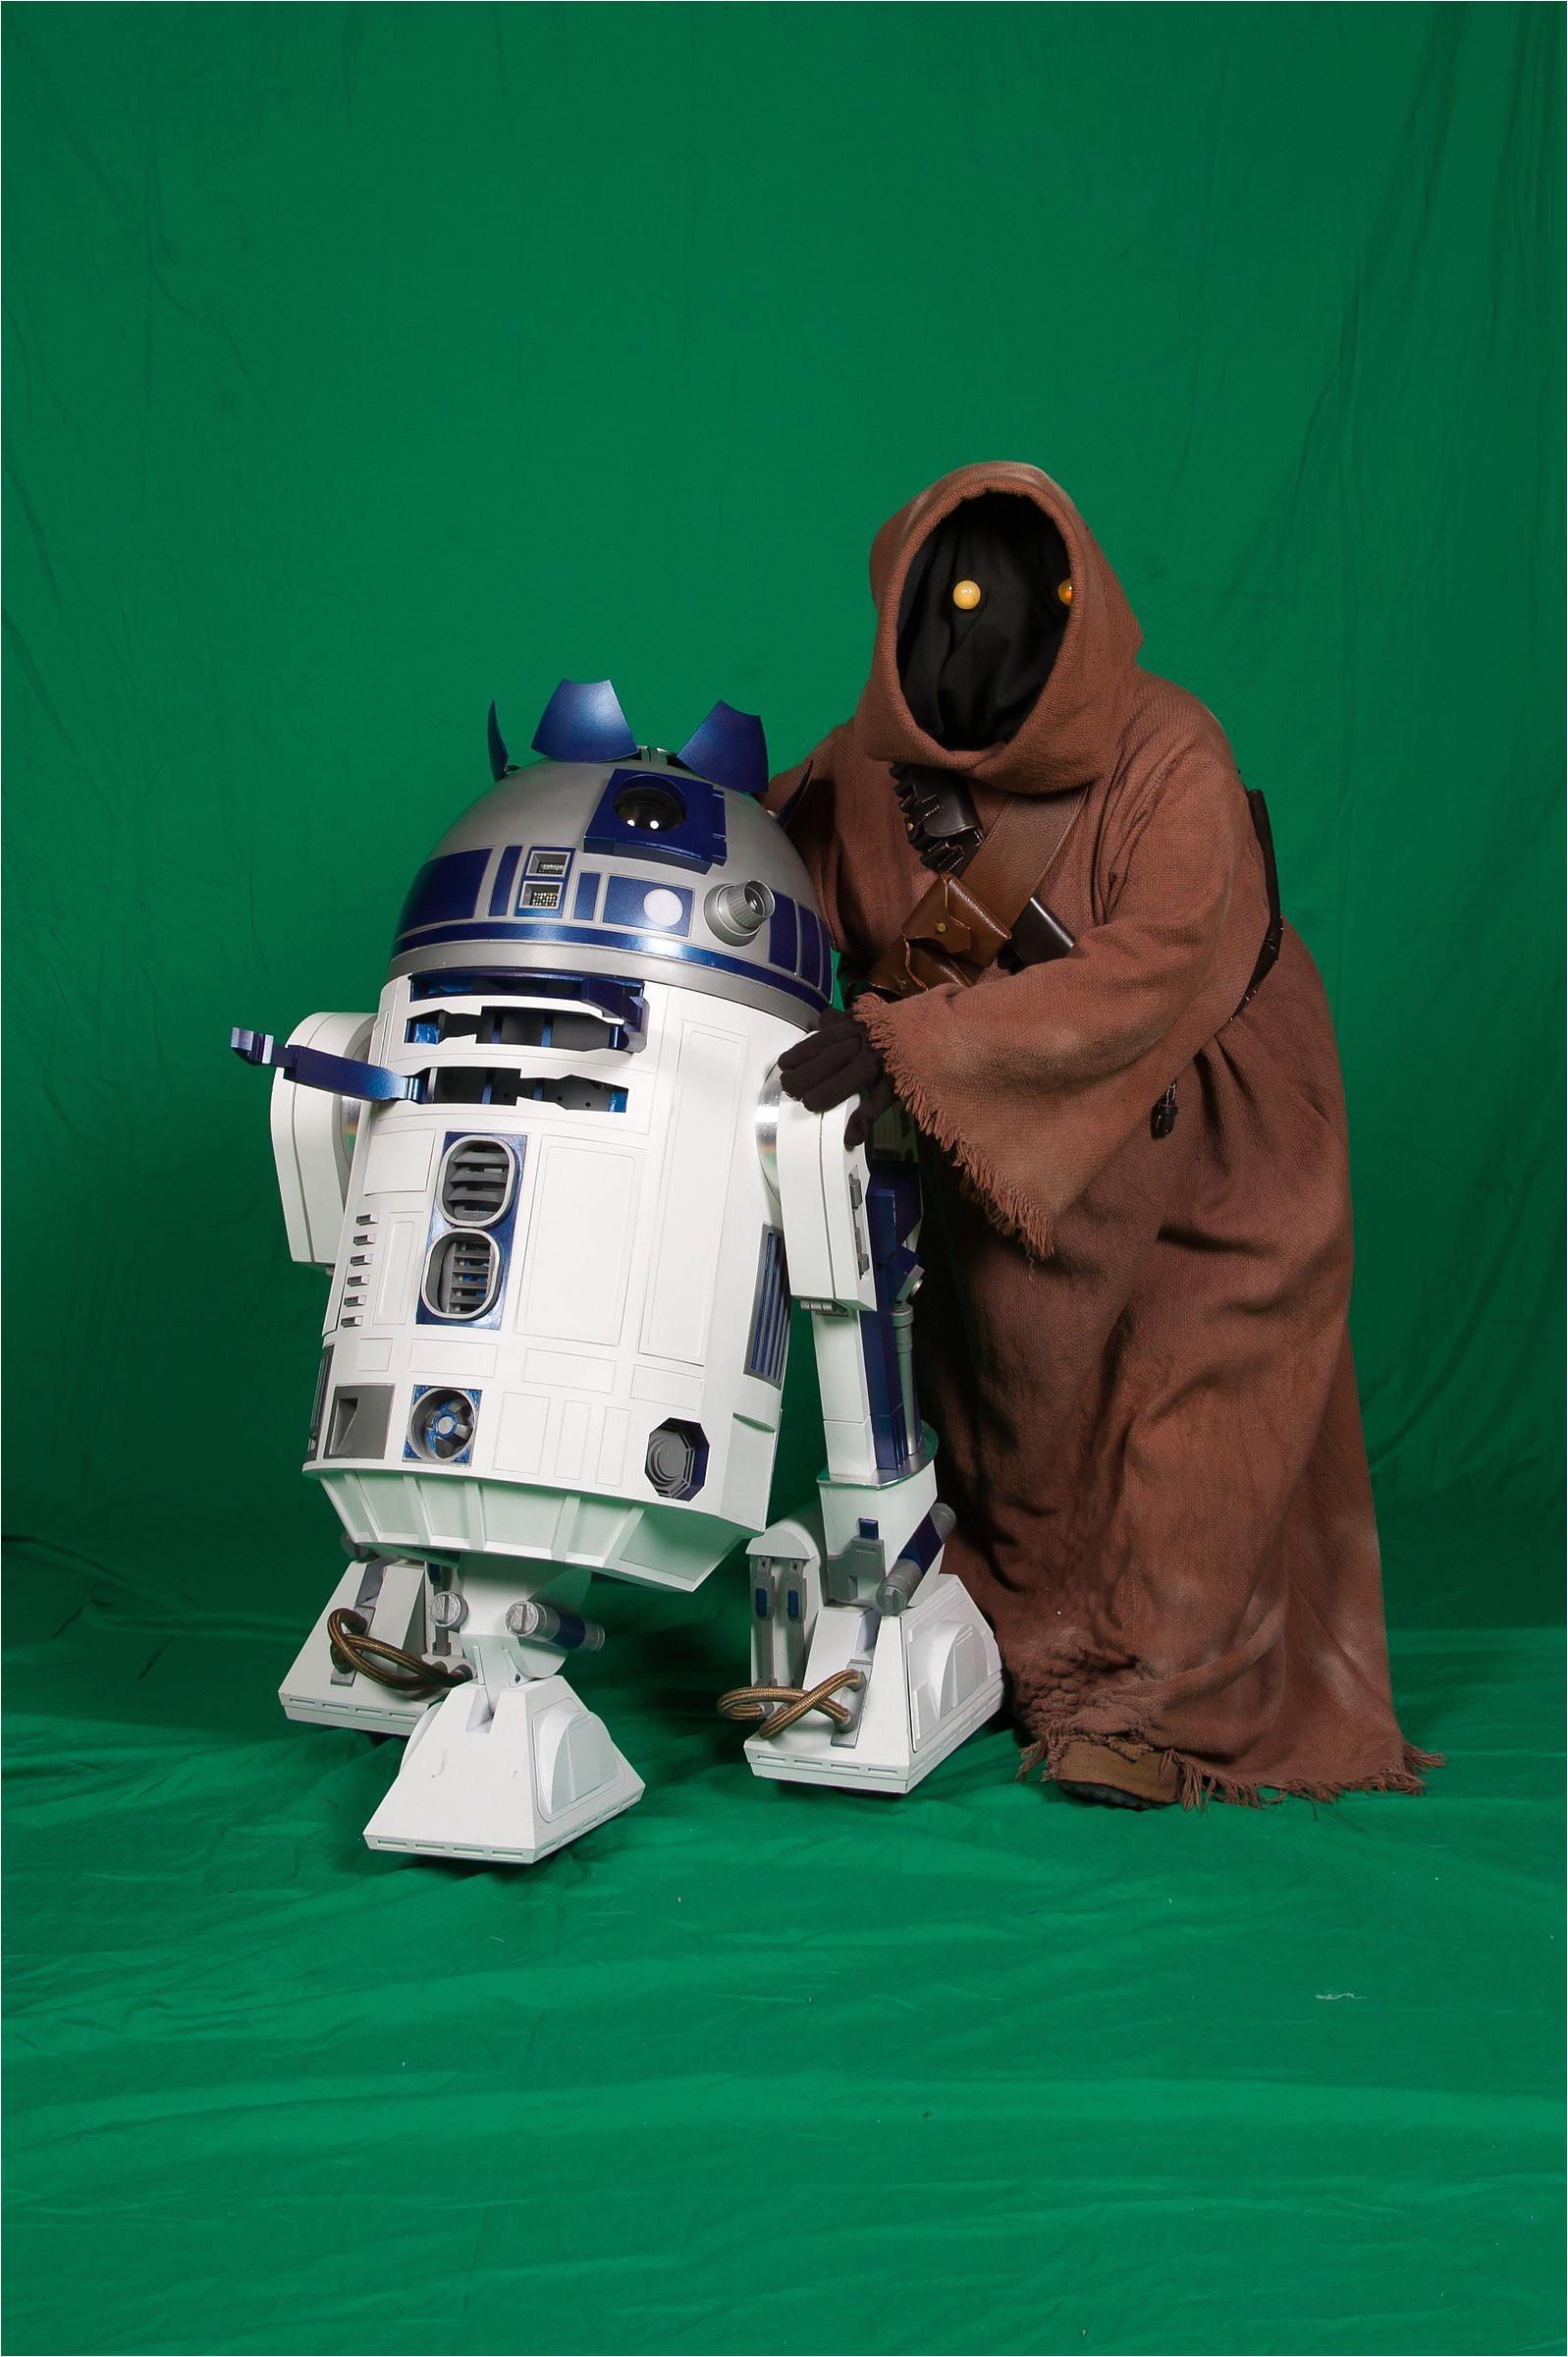 paint shaver pro rental home depot the prehensive guide to building a realistic r2 d2 replica